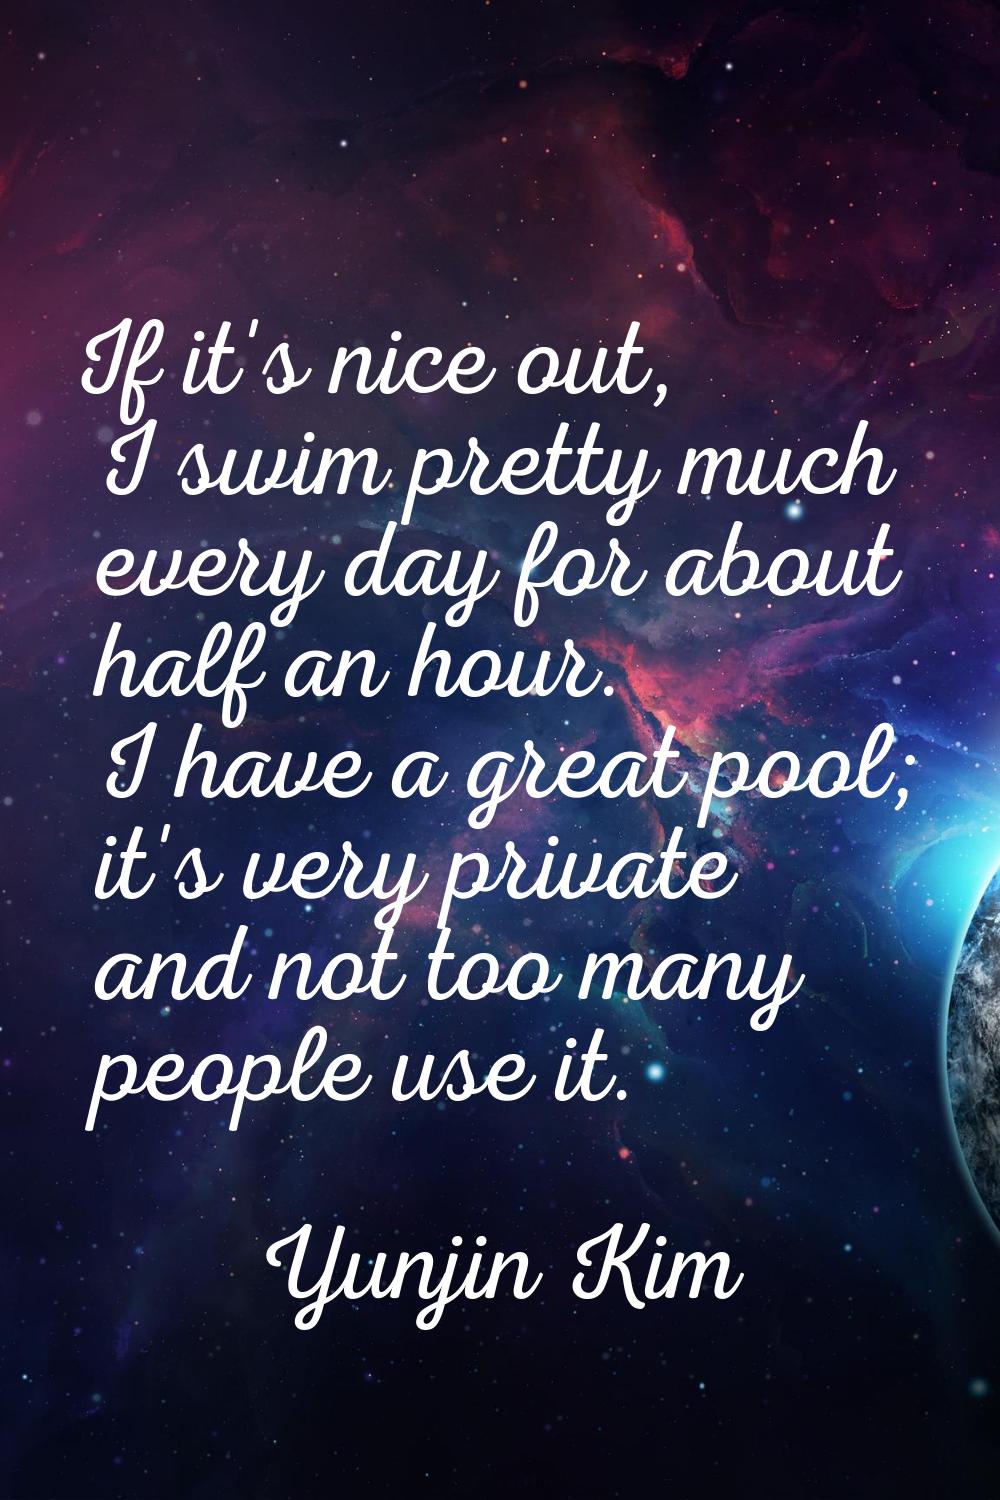 If it's nice out, I swim pretty much every day for about half an hour. I have a great pool; it's ve